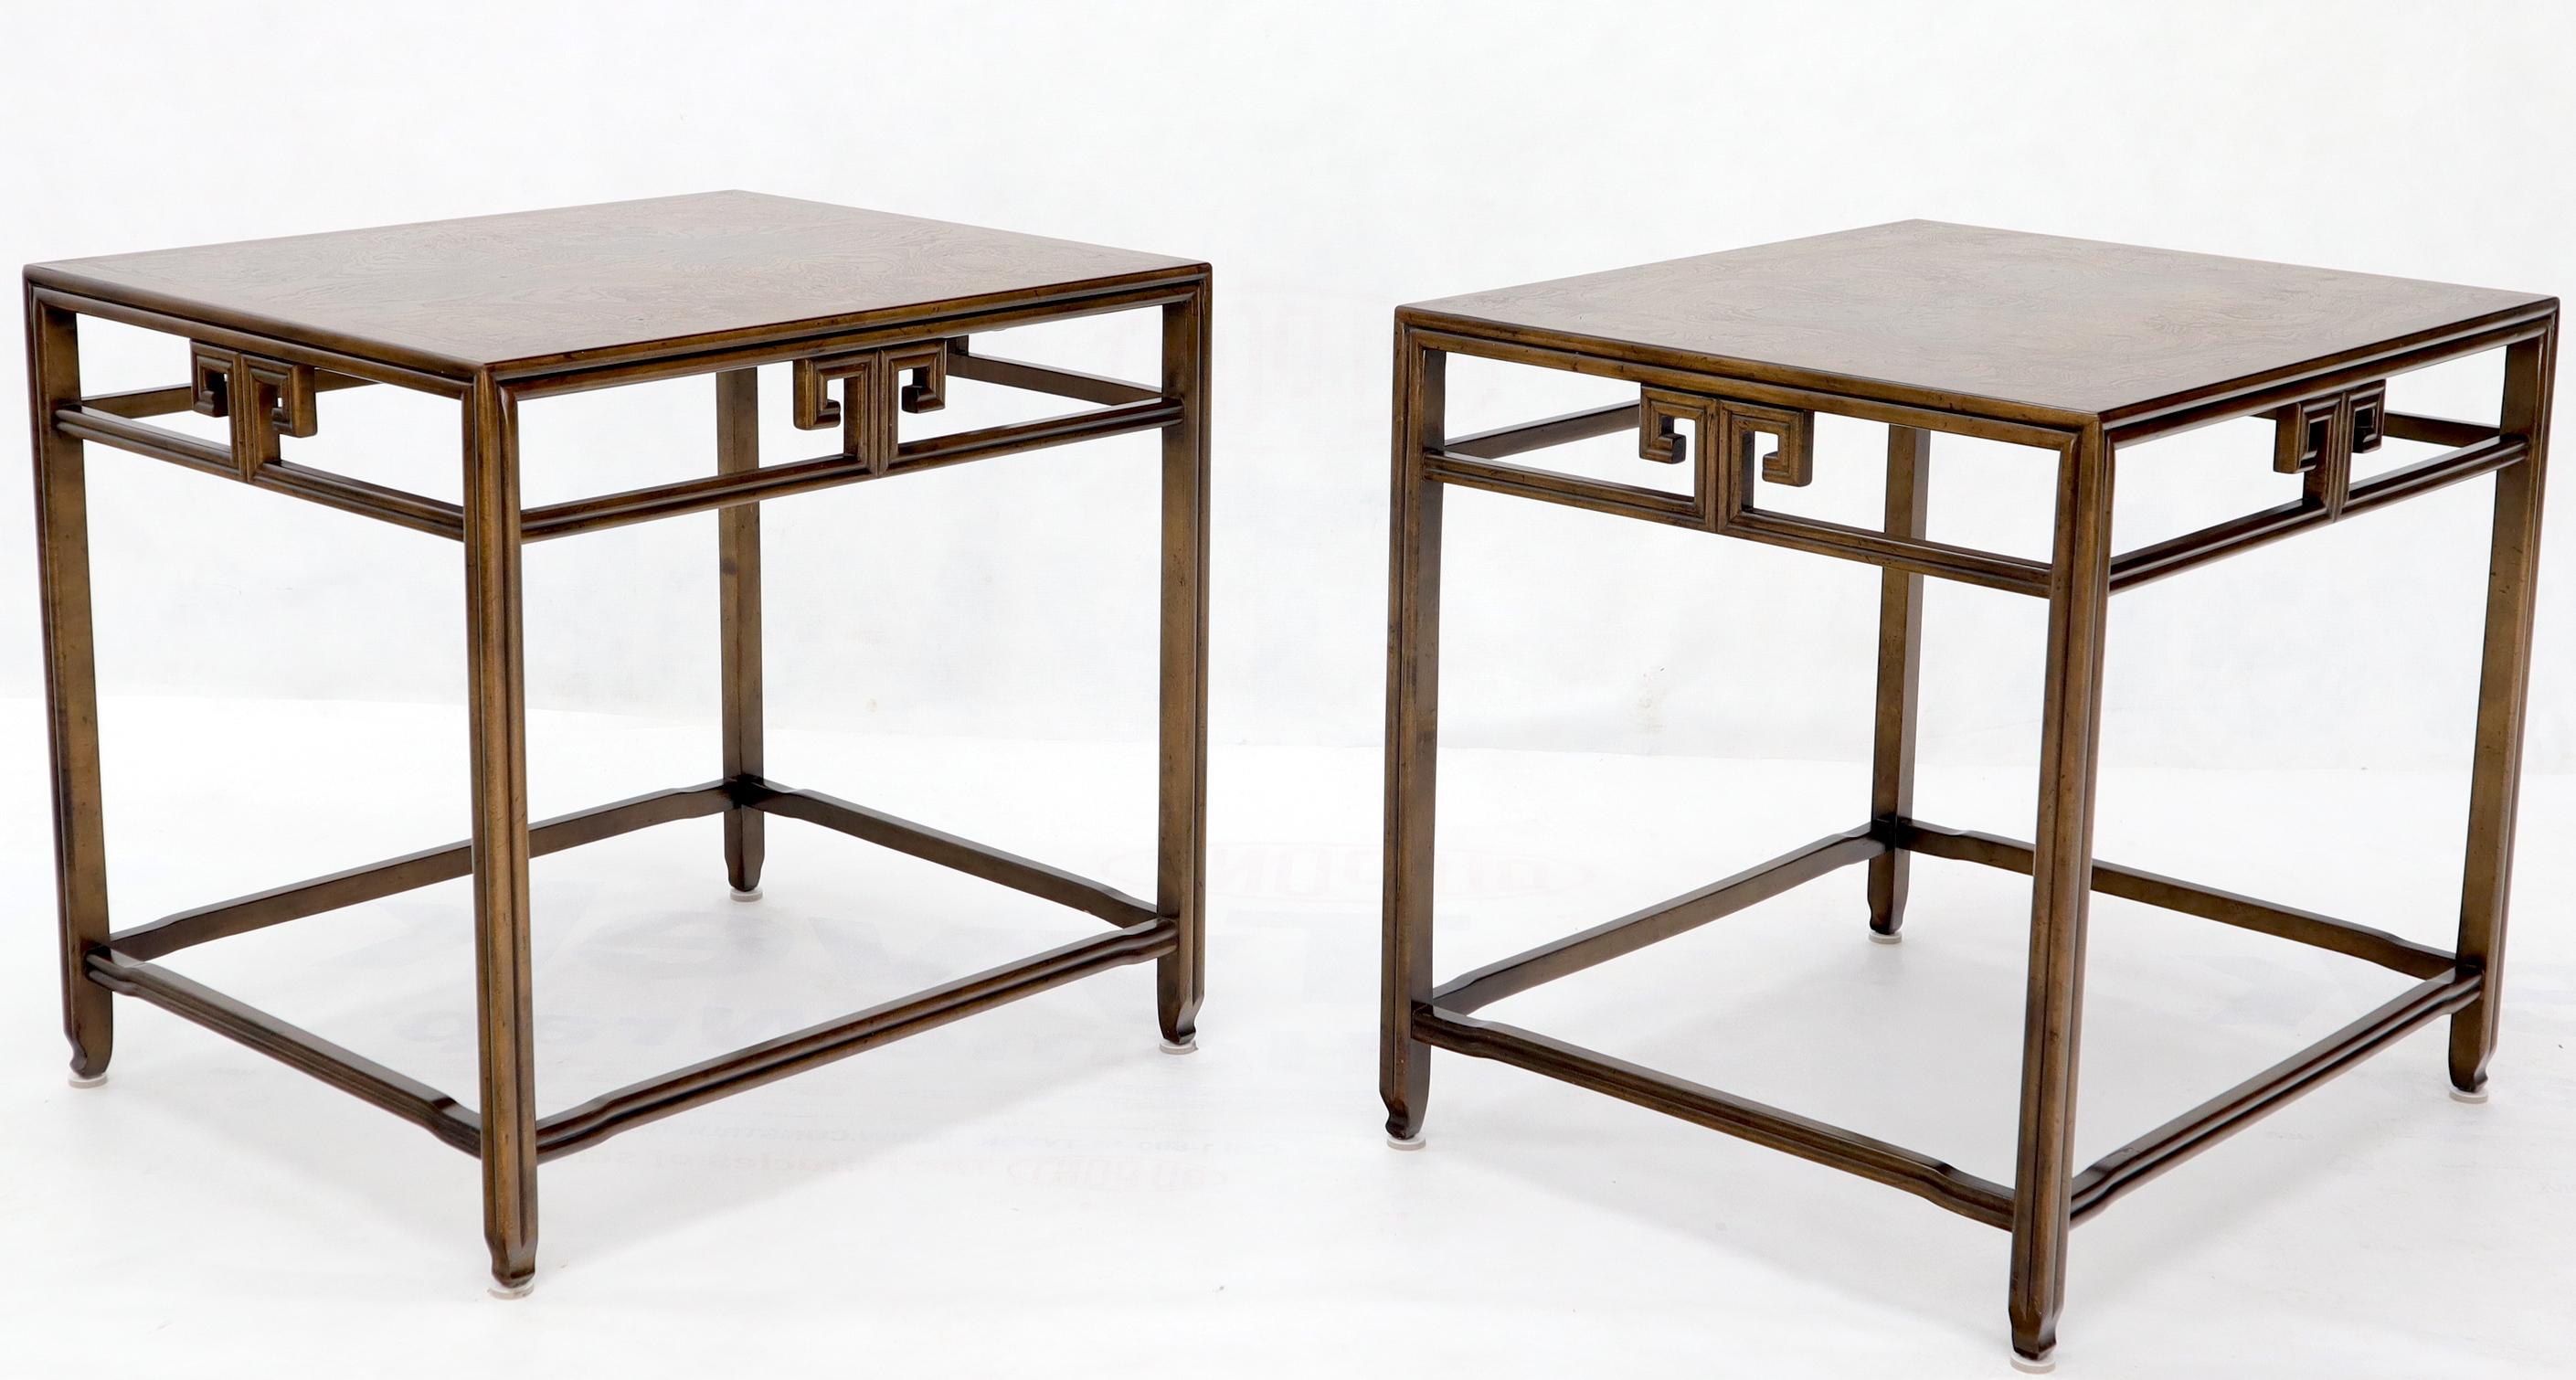 Pair of Burl Wood Asian Influence Side End Tables Stands by Baker 2